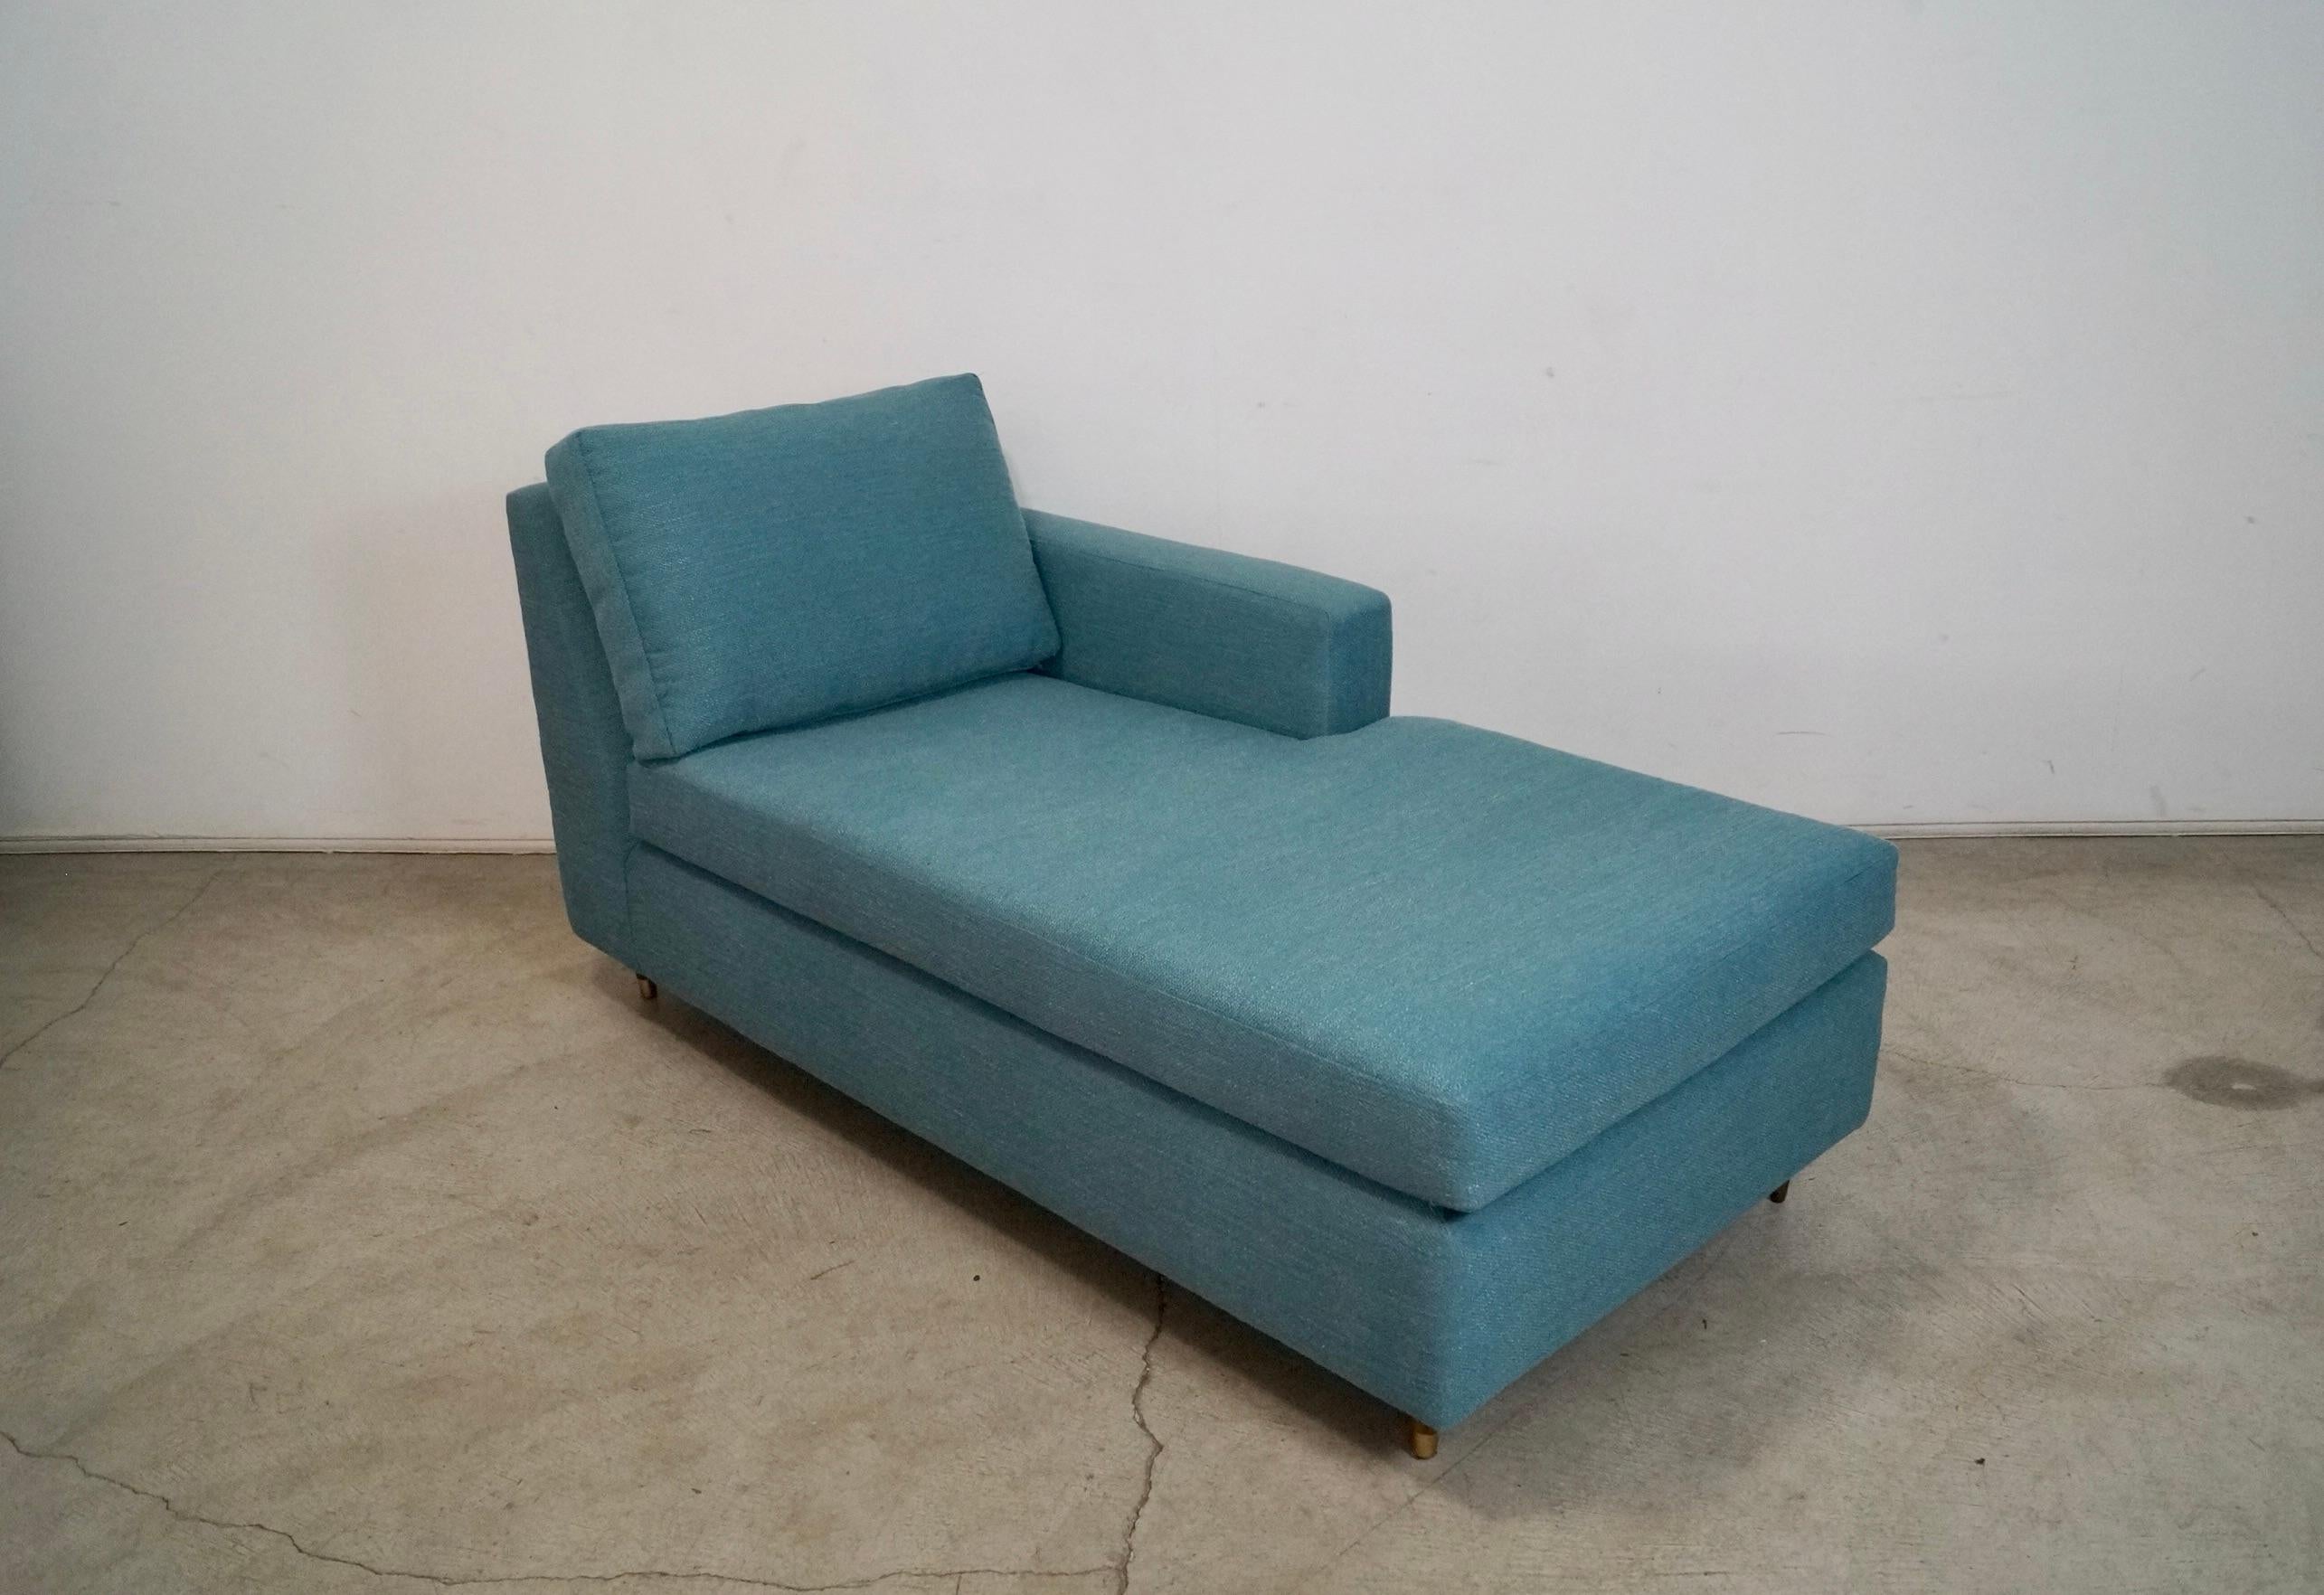 1970's Mid-Century Modern Single Arm Reupholstered Chaise Lounge Daybed For Sale 6